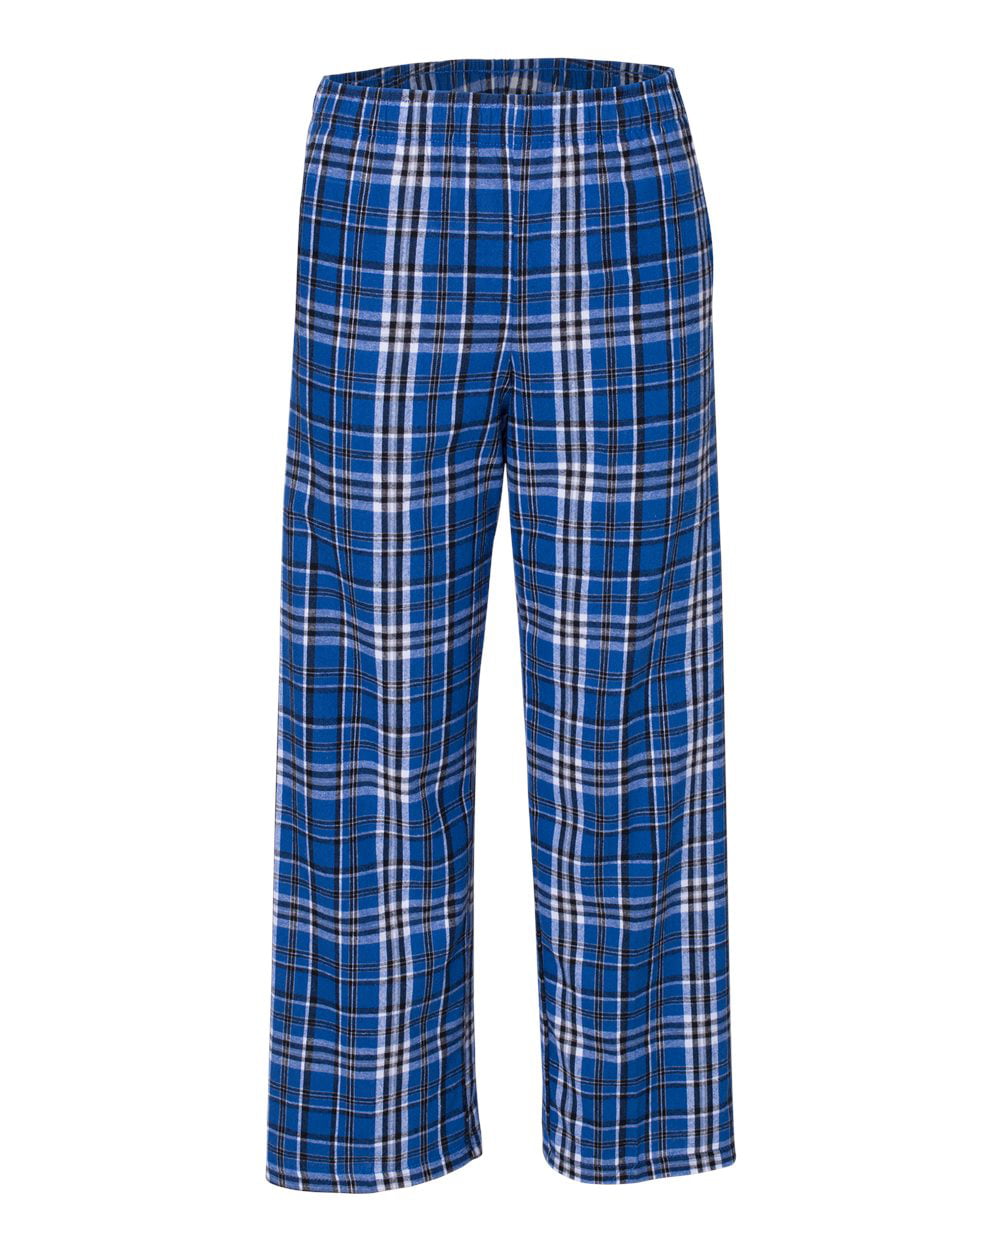 Boxercraft - Boxercraft - New IWPF - Girls - Youth Flannel Pants with ...